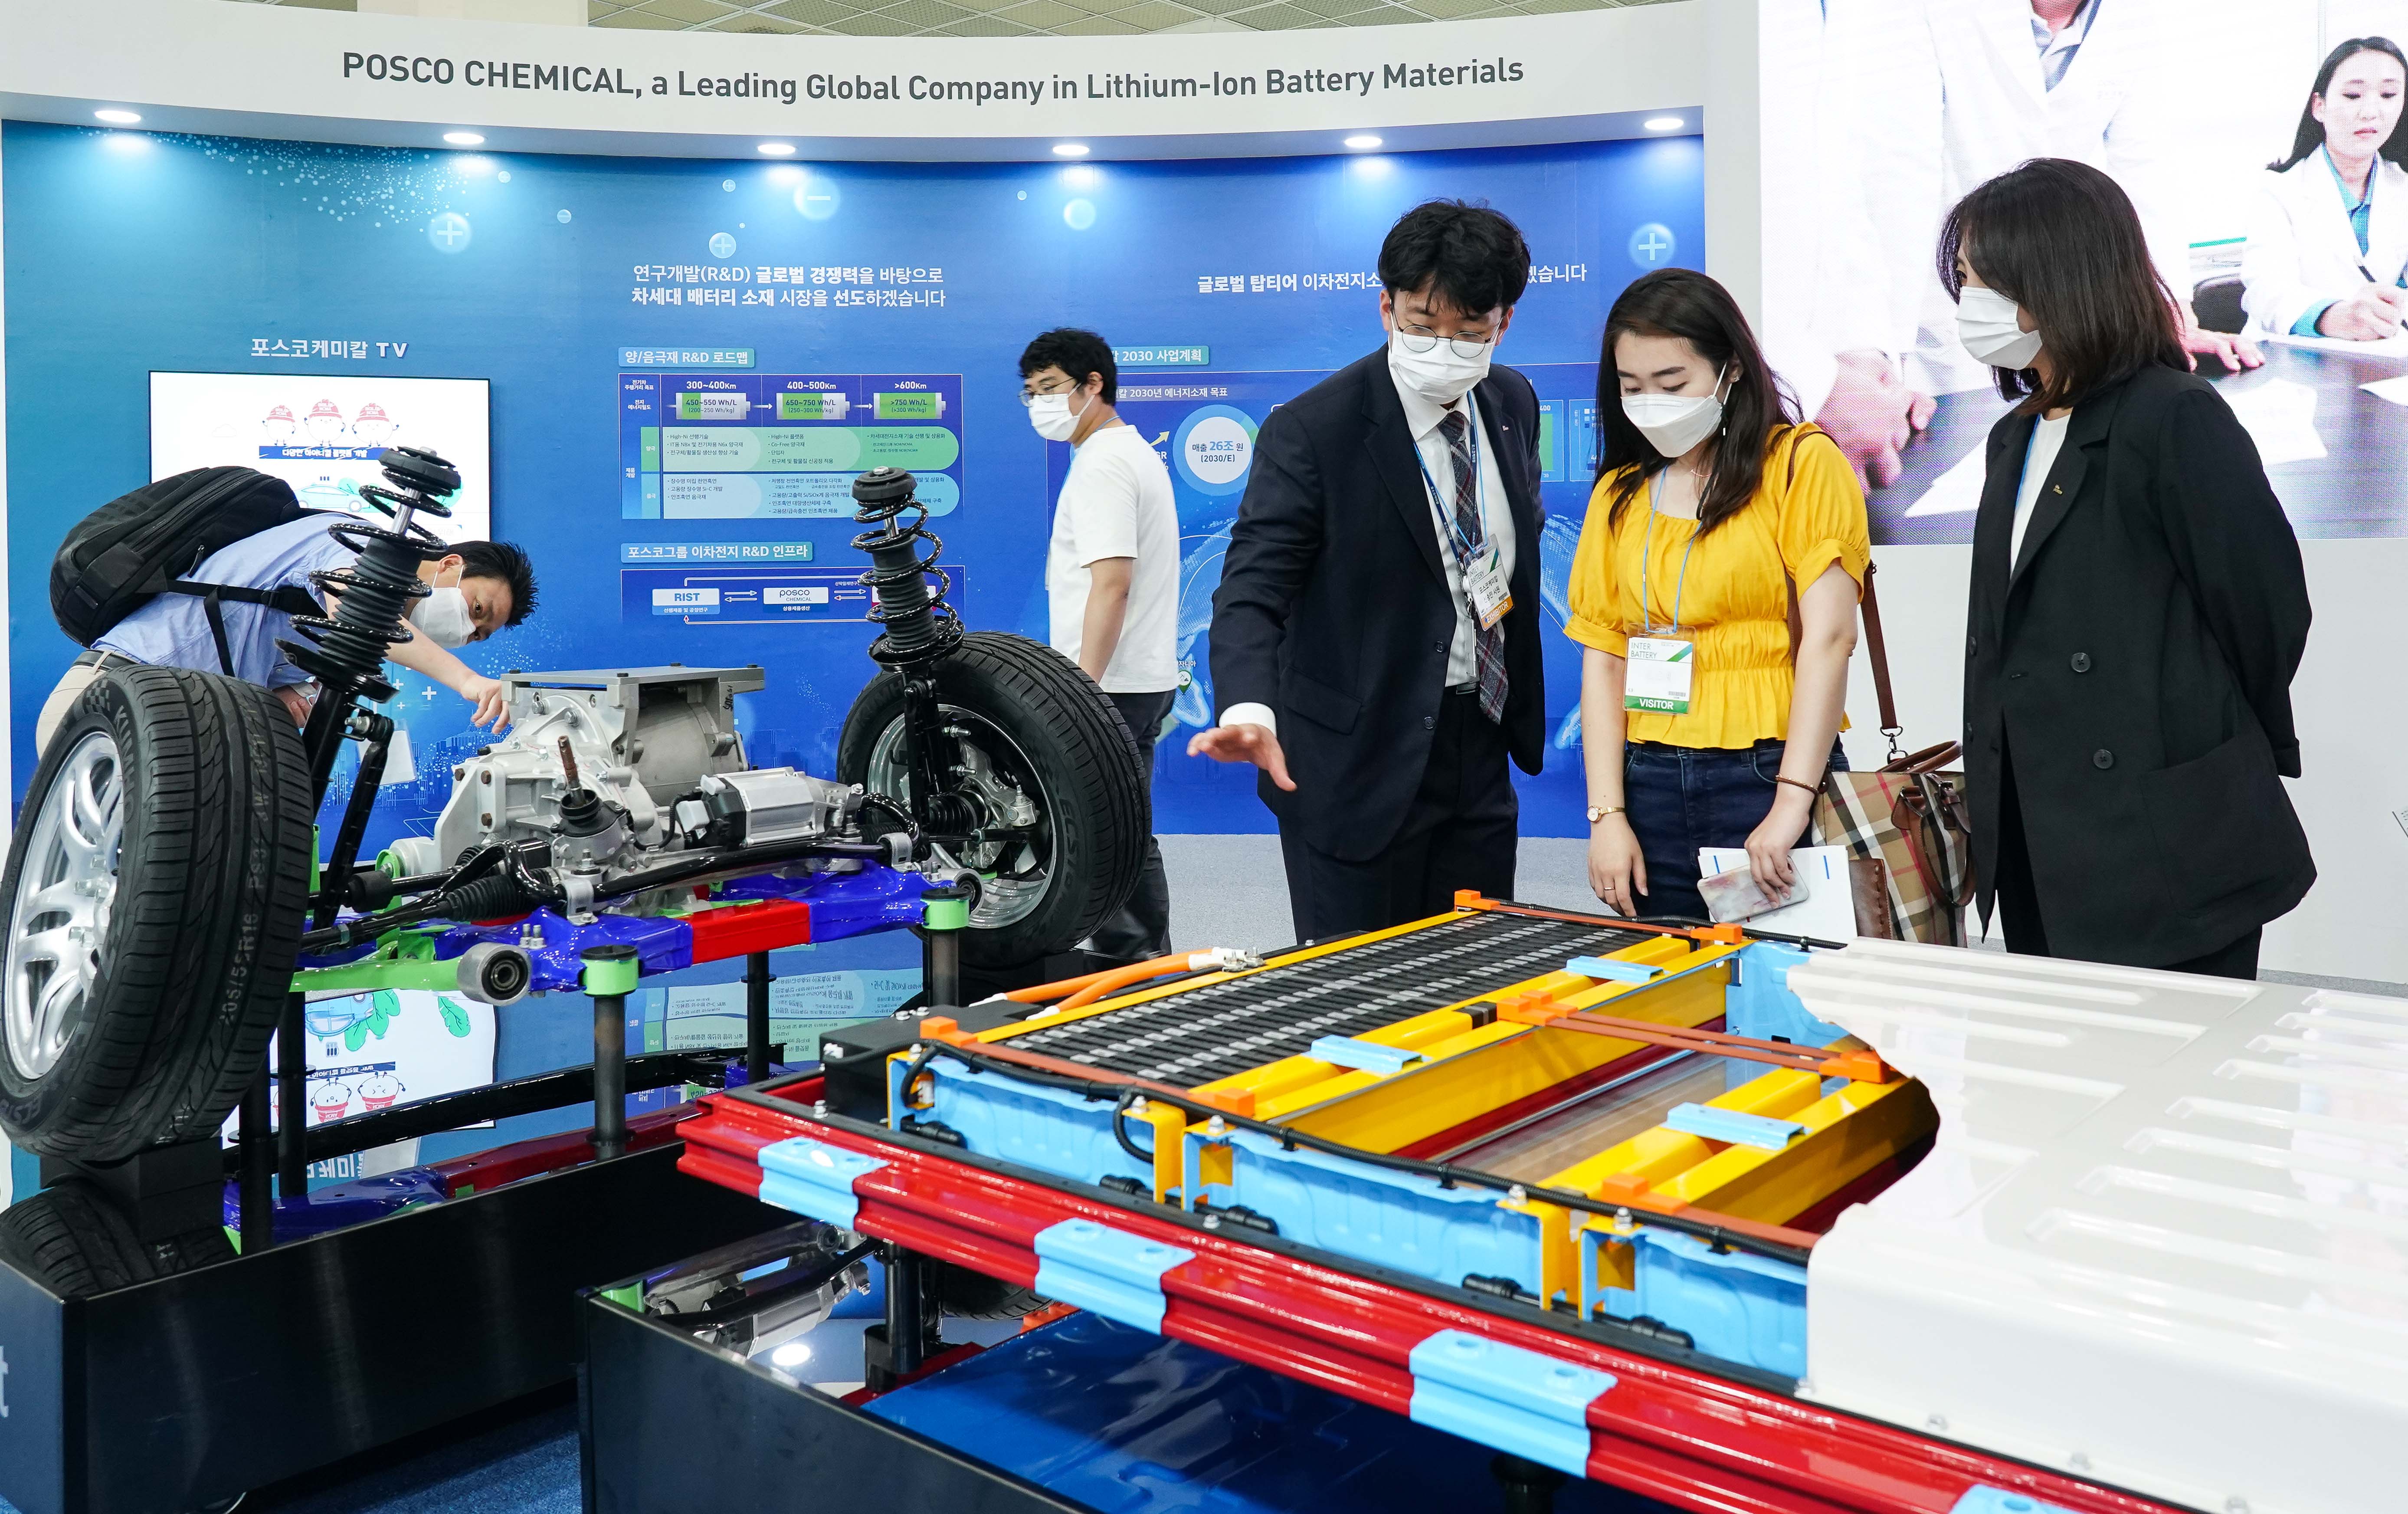 Visitors at POSCO Chemical's booth